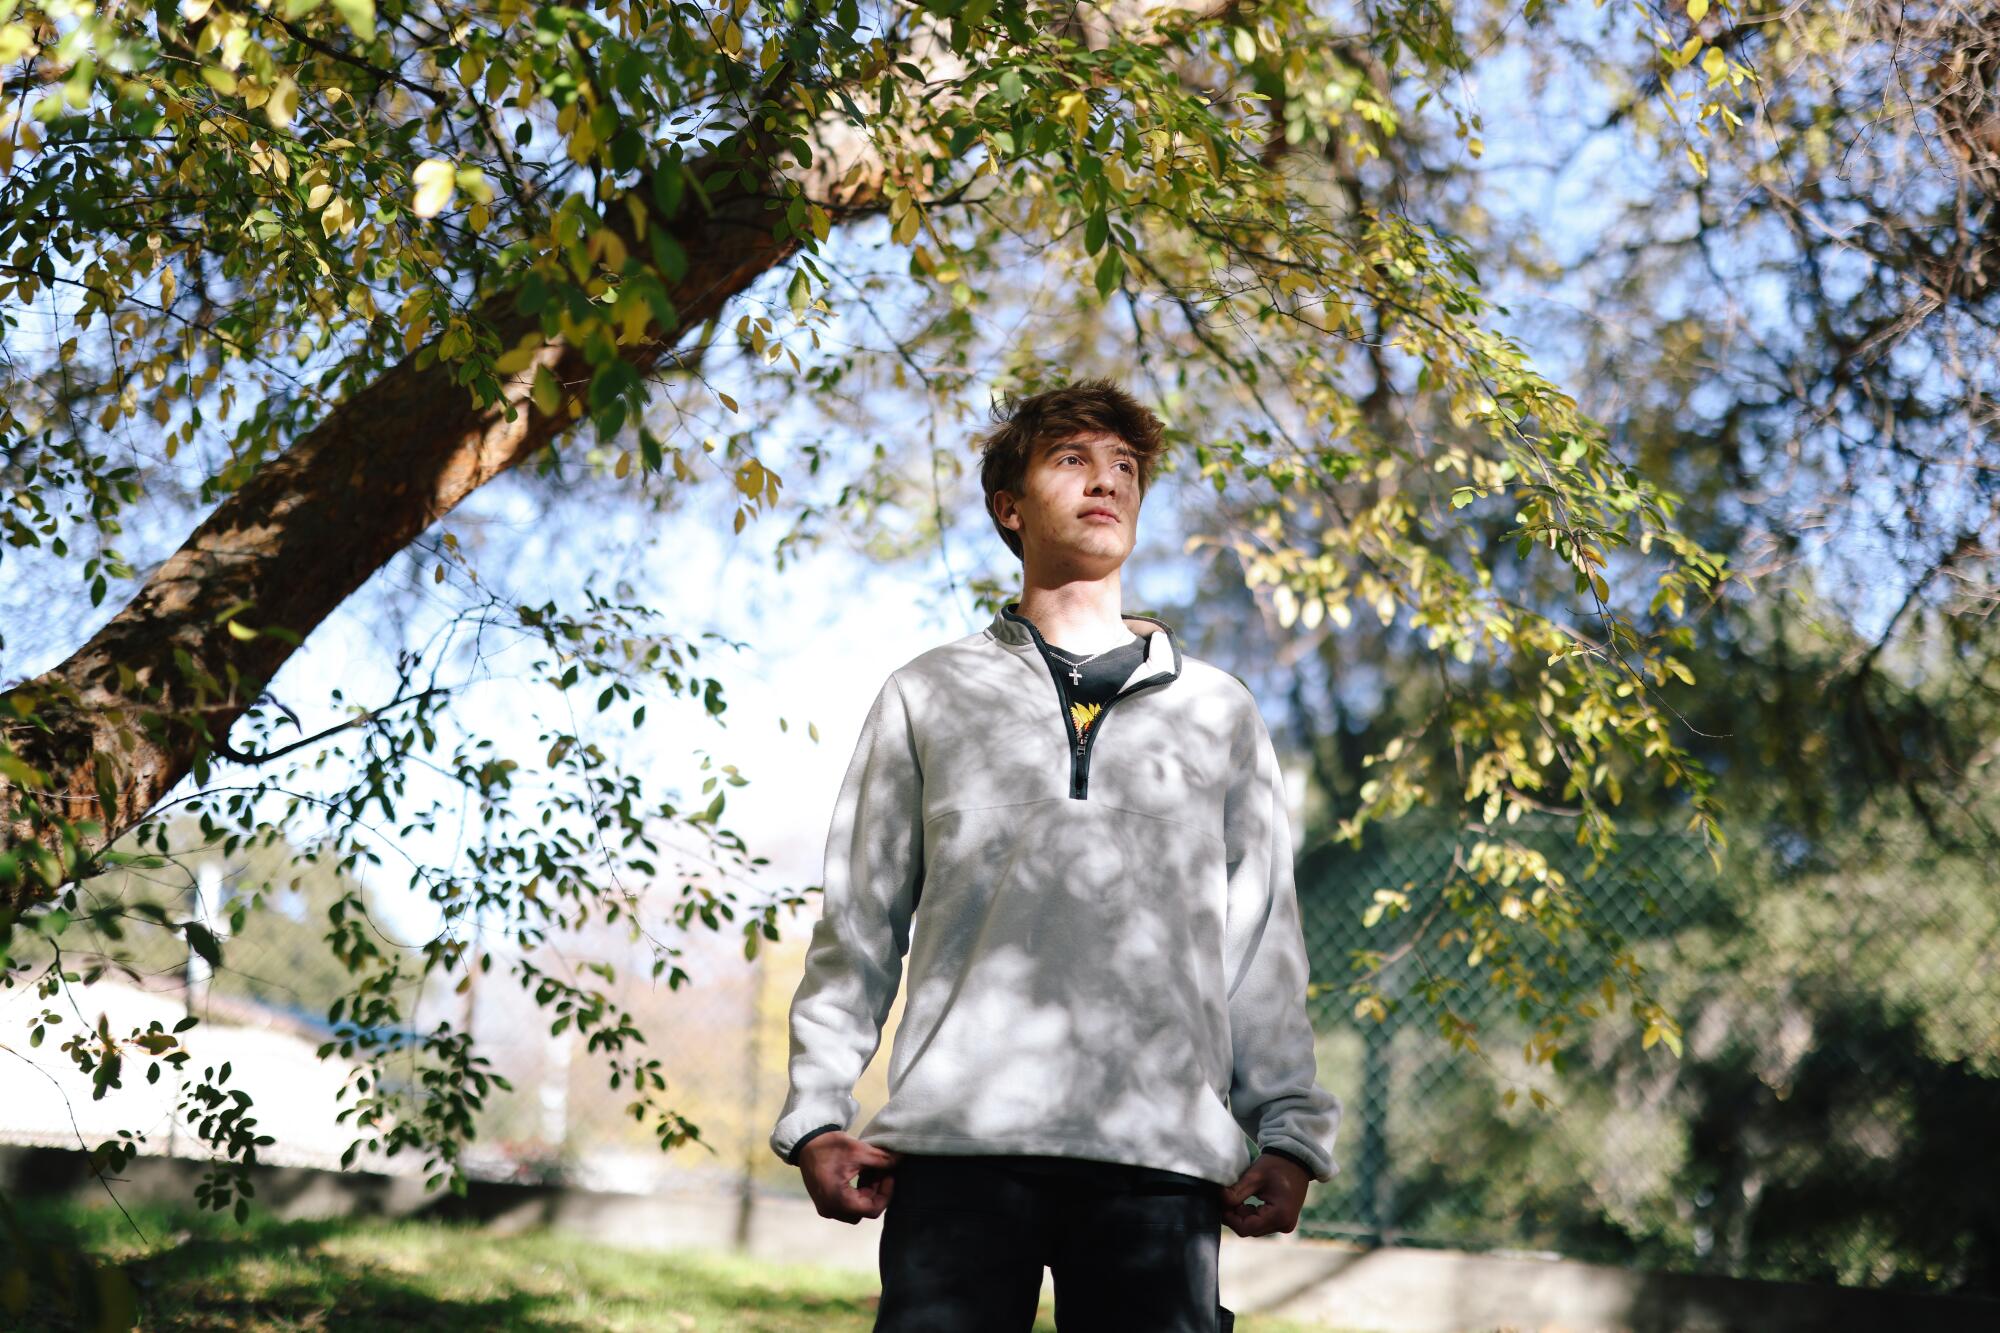 A young man in a sweatshirt stands under a tree.